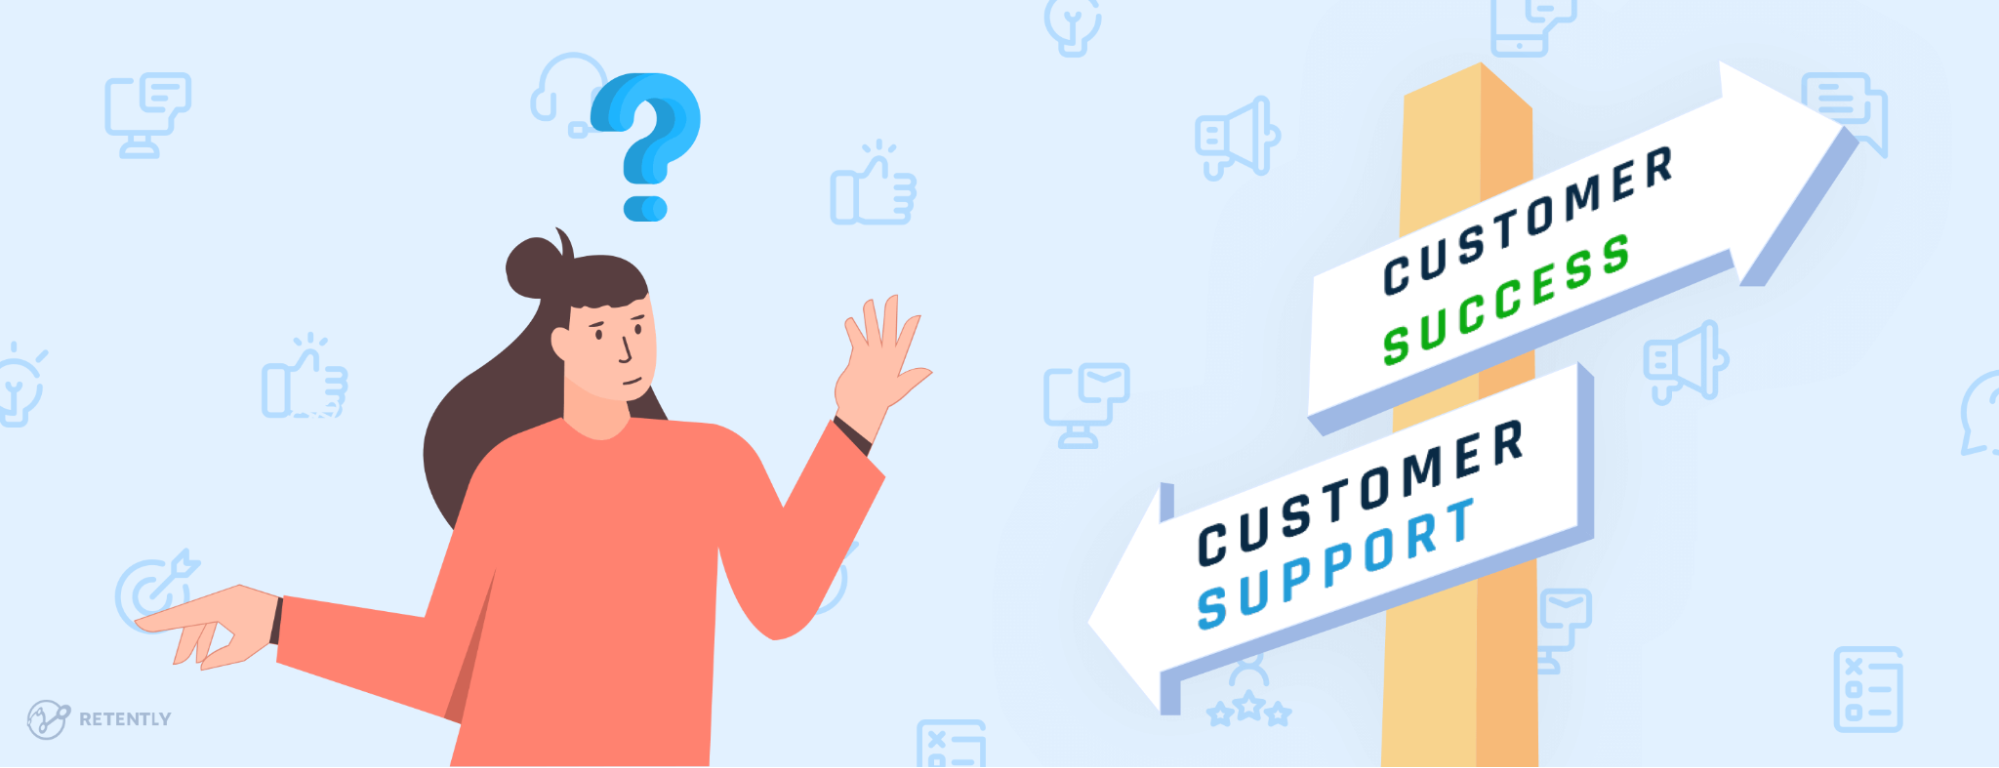 customer support images